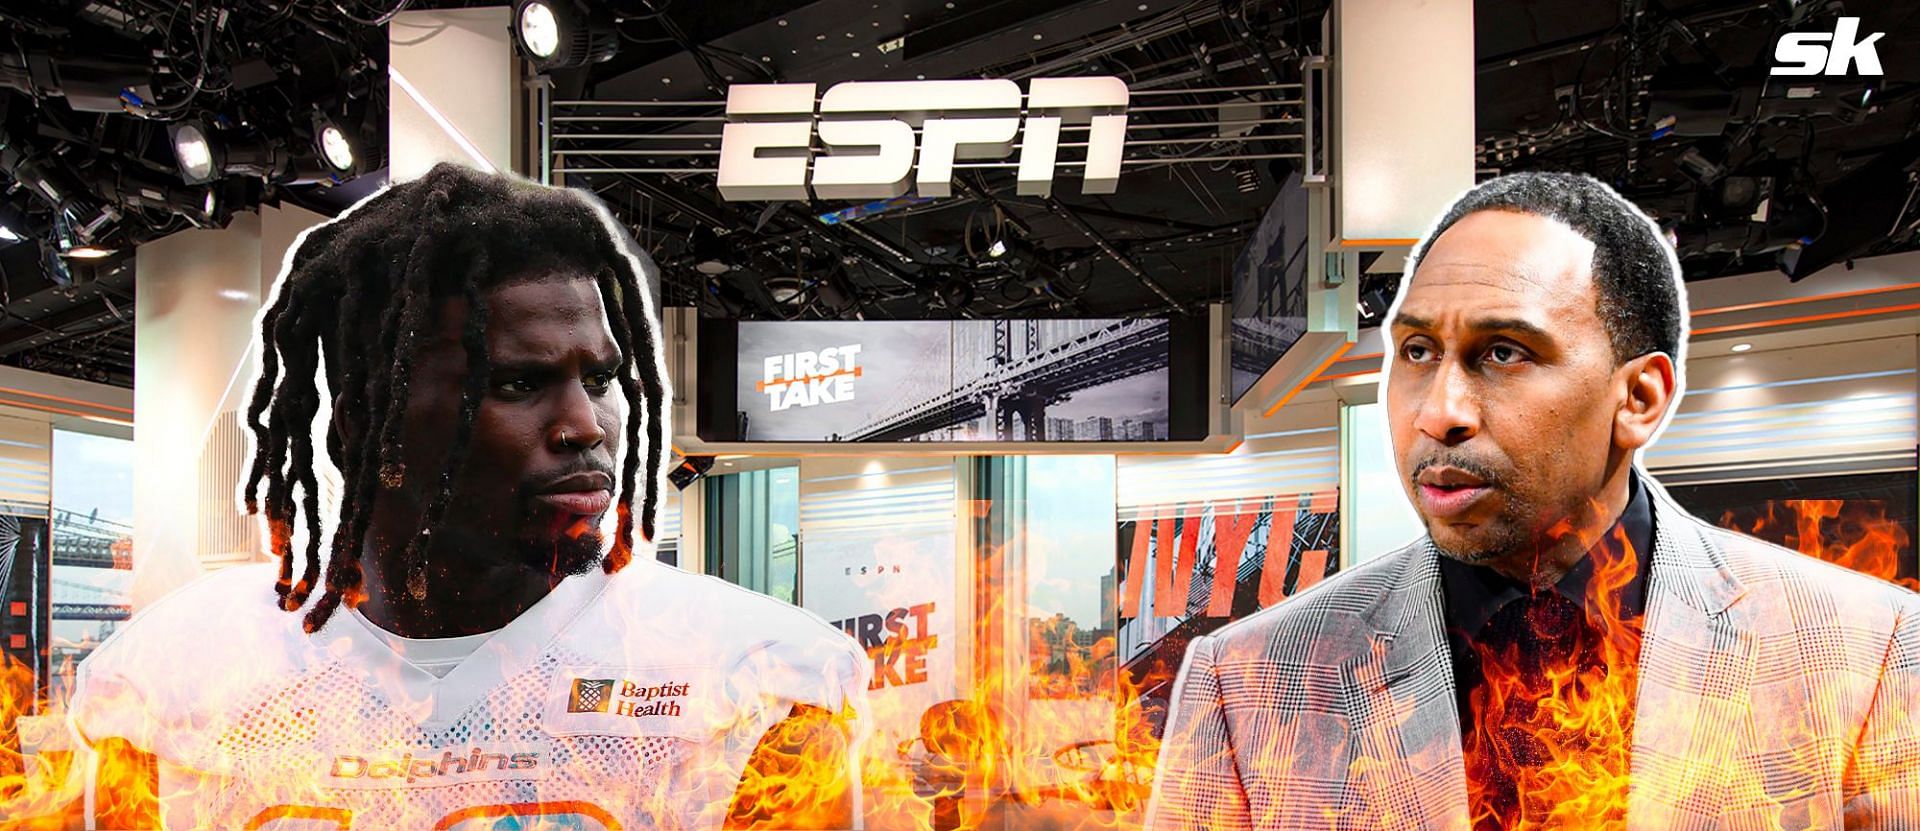 Espn’s Stephen A Smith Fires Back At Tyreek Hill “watch Your Mouth”